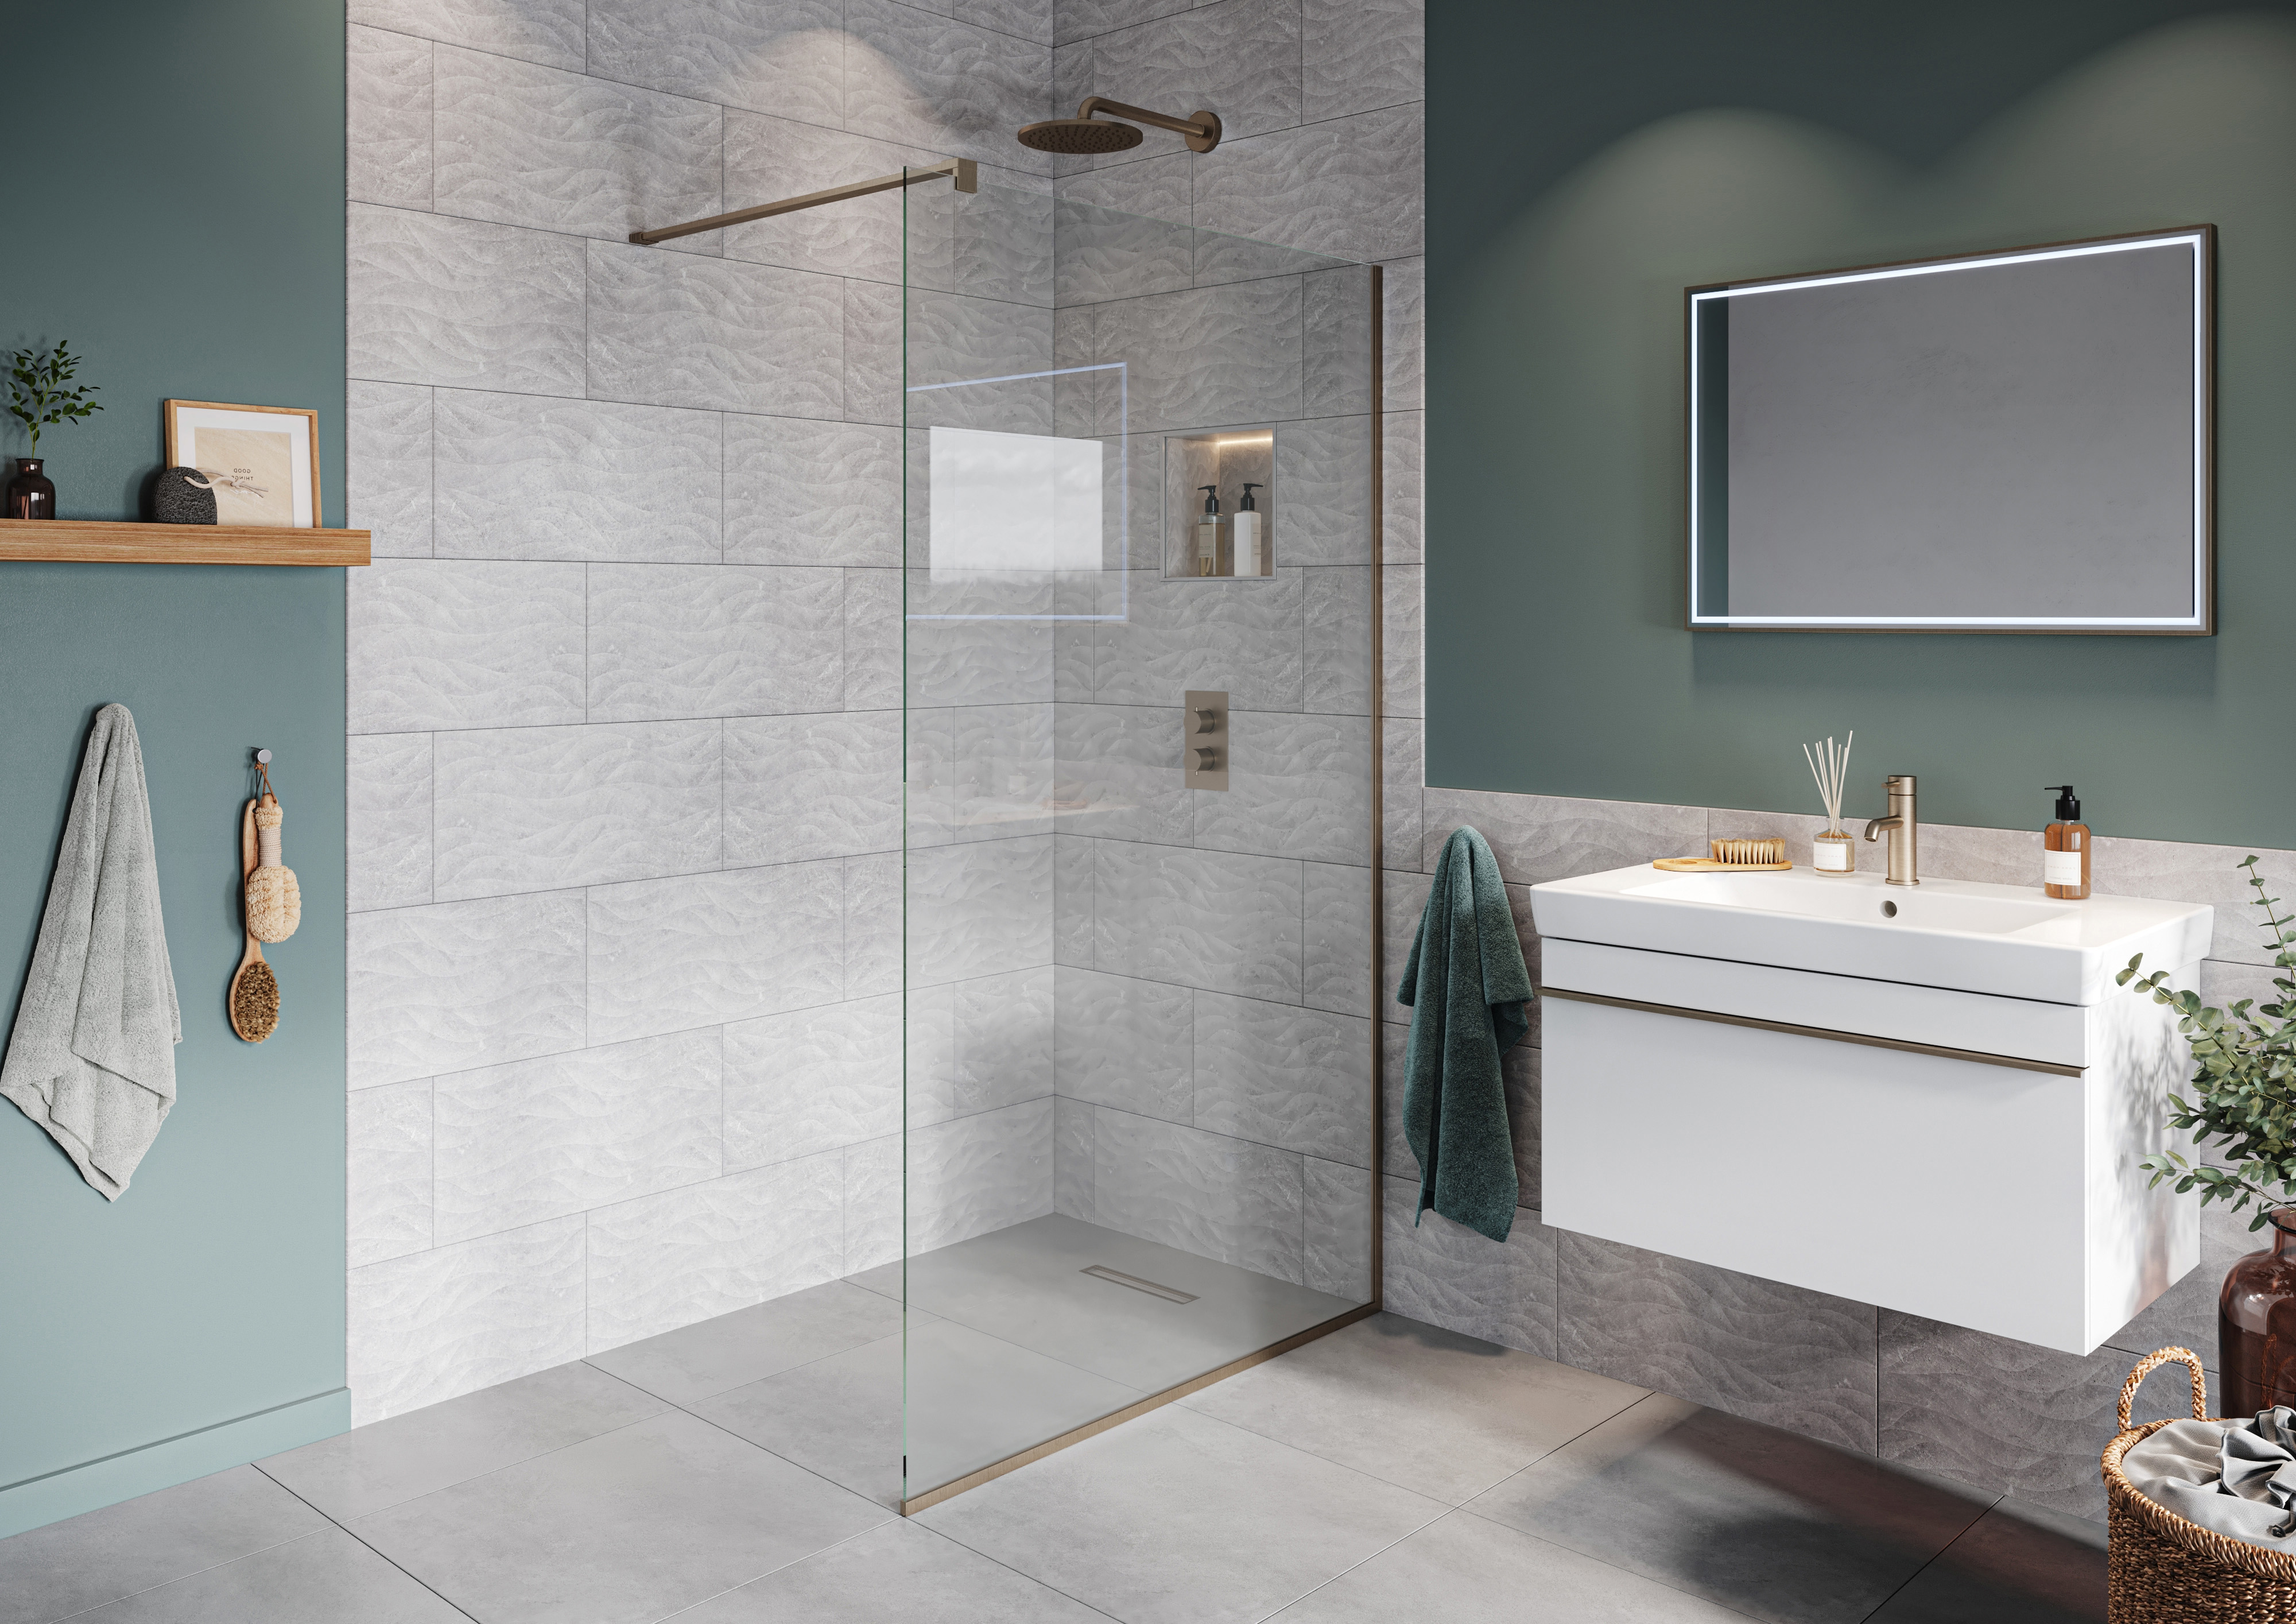 Hadleigh 8mm Brushed Nickel Frameless Wetroom Screen with Wall Arm - 900mm